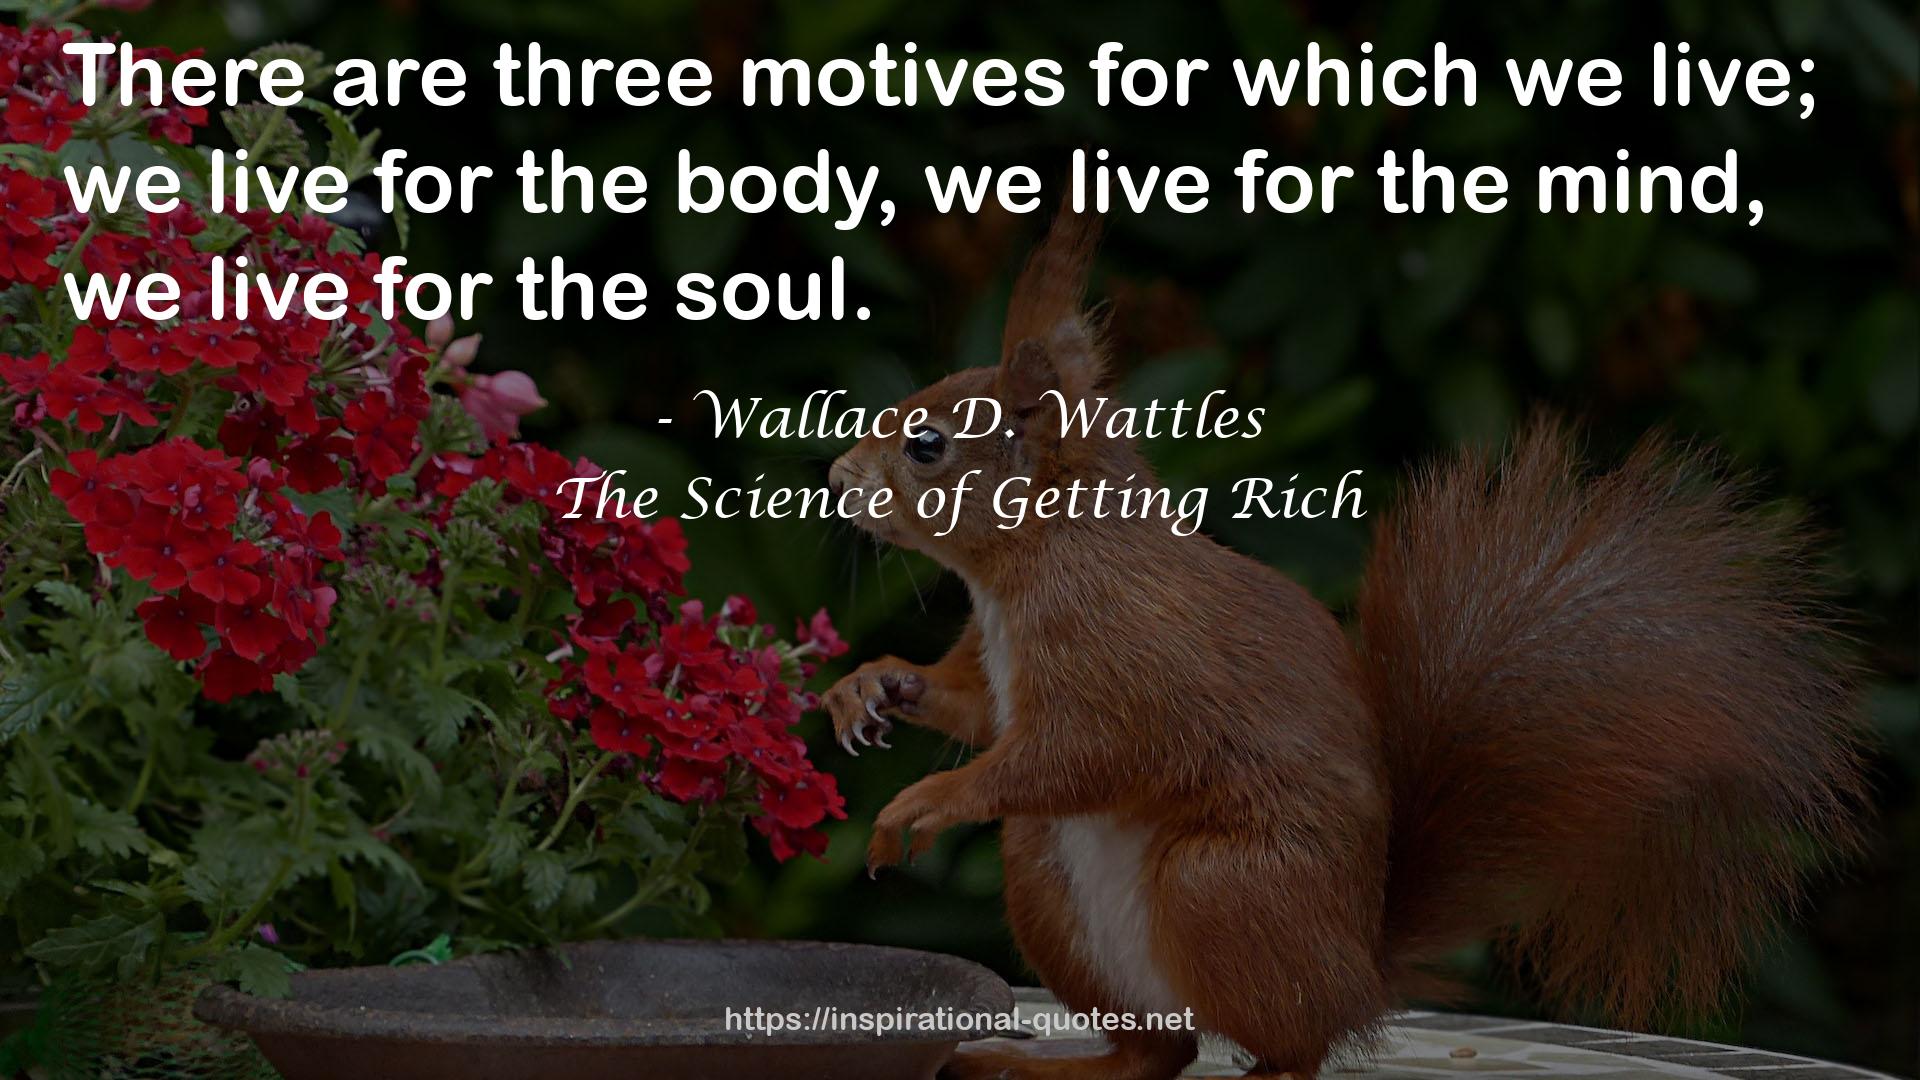 Wallace D. Wattles QUOTES